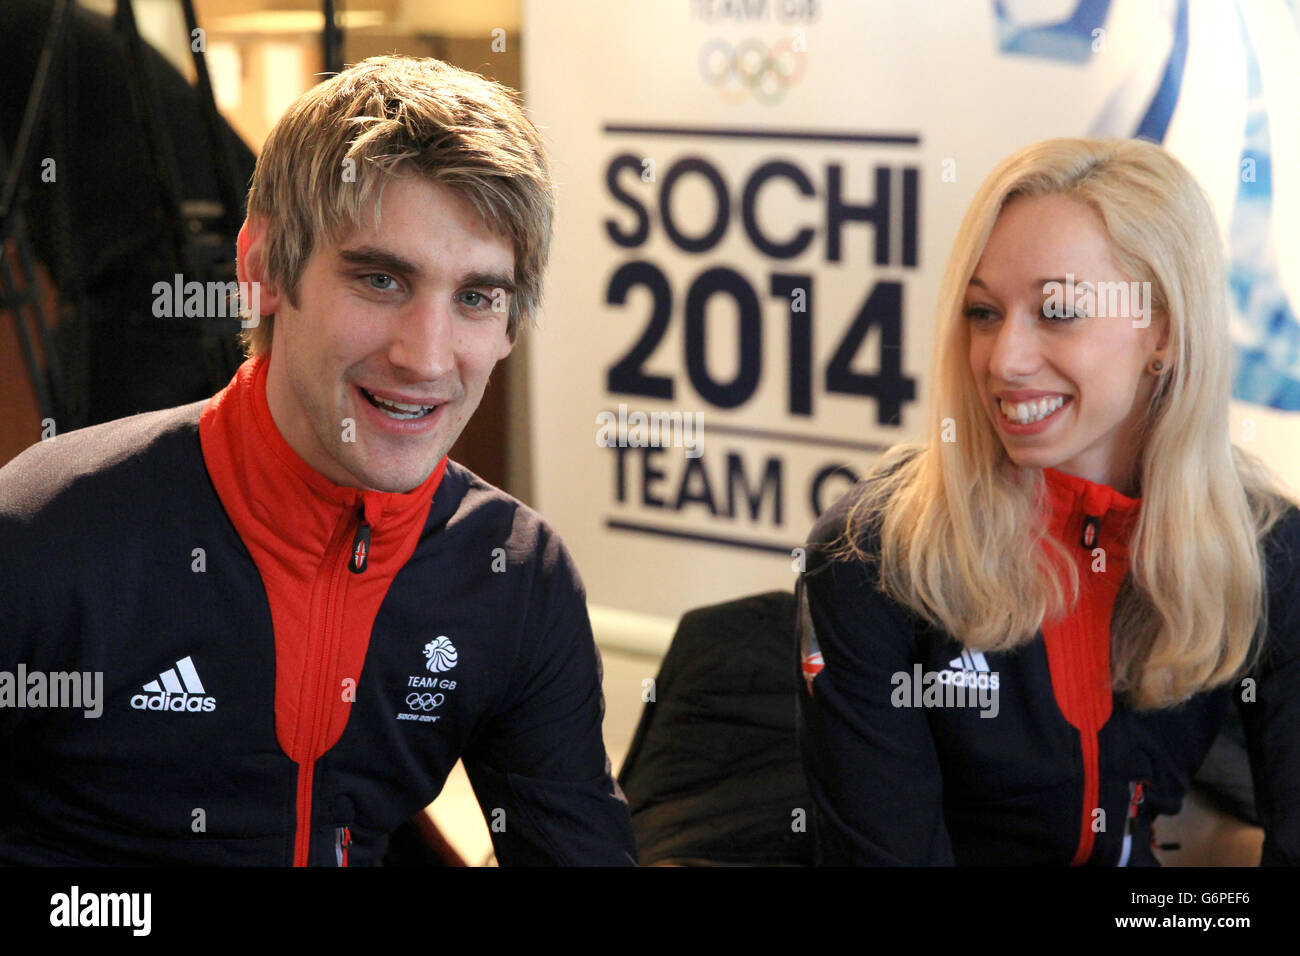 GB Winter Olympic Team members, Figure Skaters David King and his partner Stacey Kemp, during the Team GB kitting session at the adidas Centre, Stockport Stock Photo